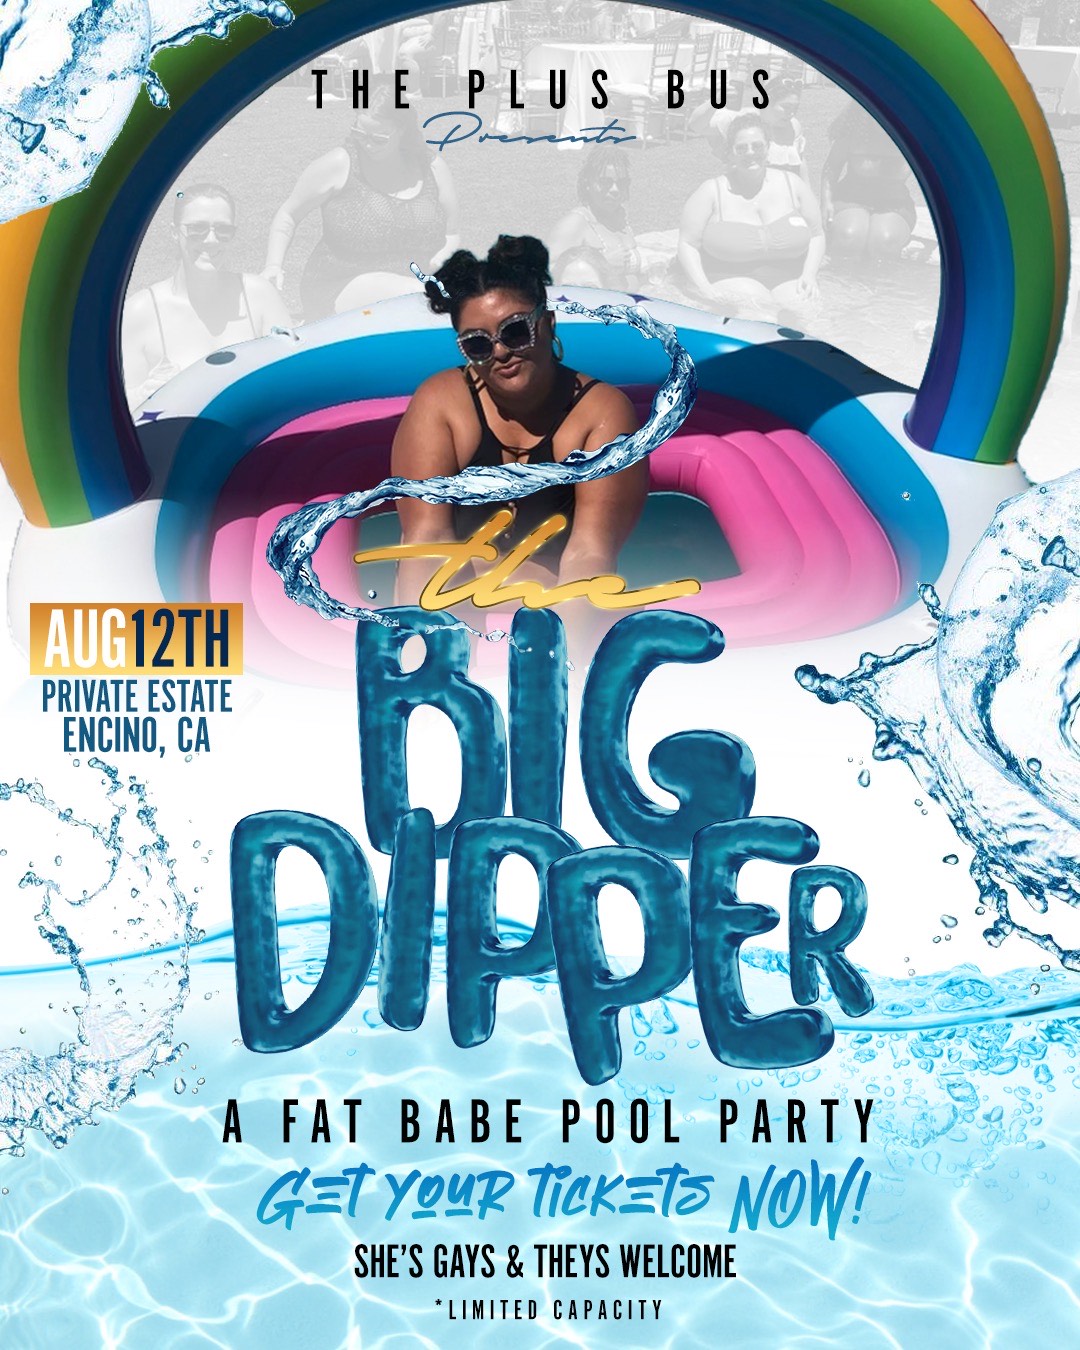 Kicking off the Celebrations of TCFTurns15 with 15 Giveaways! Up First: Tickets to The Huge Dipper LA Pool Social gathering!